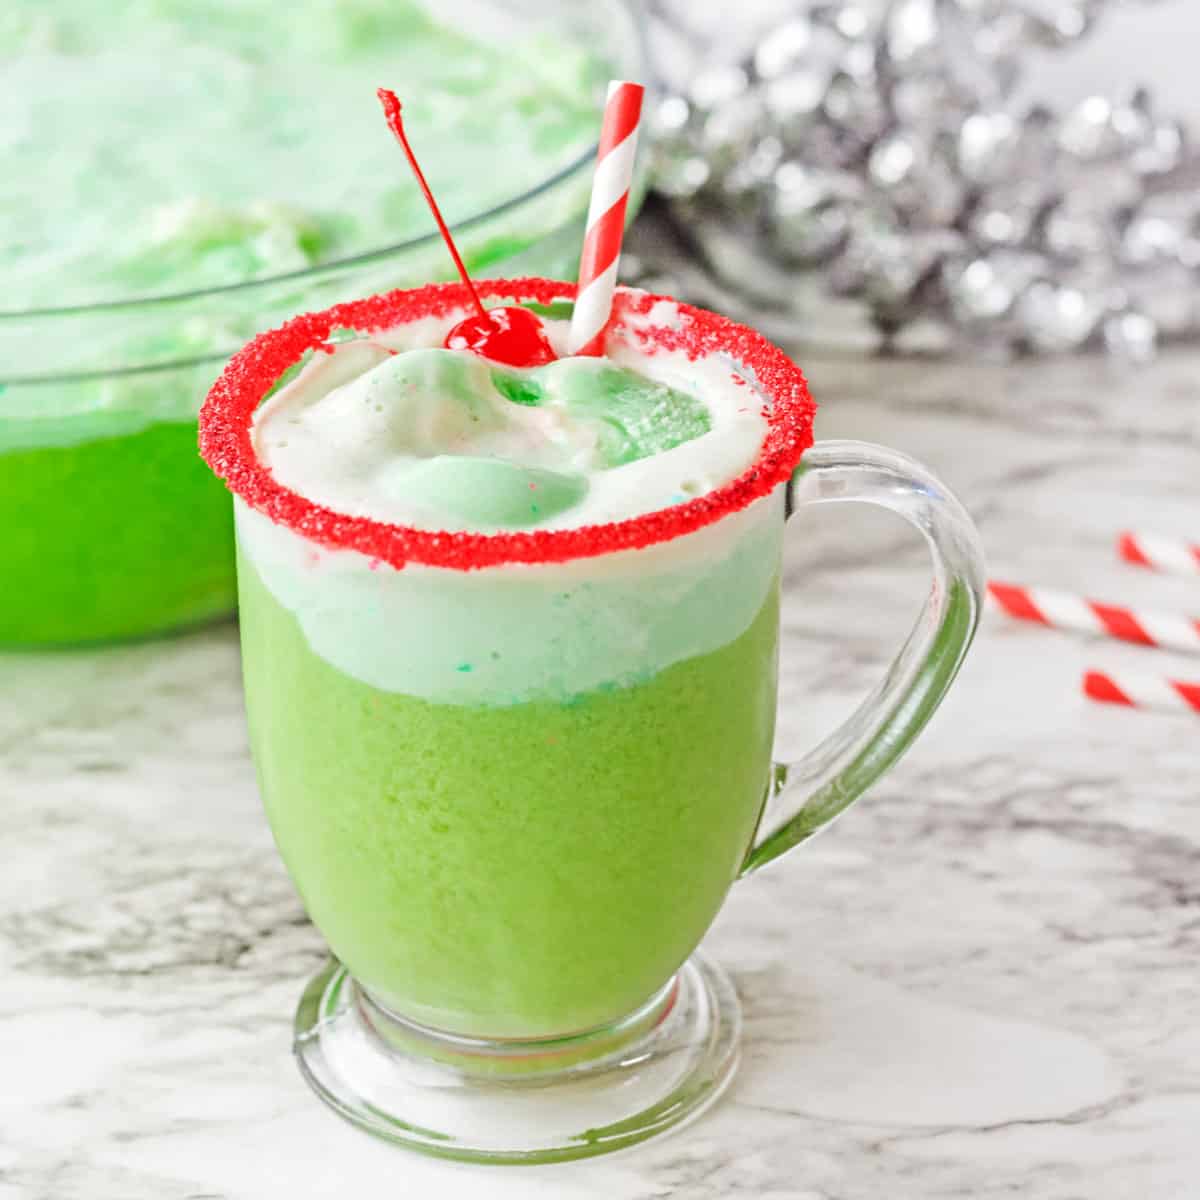 Grinch Punch - Shake Drink Repeat